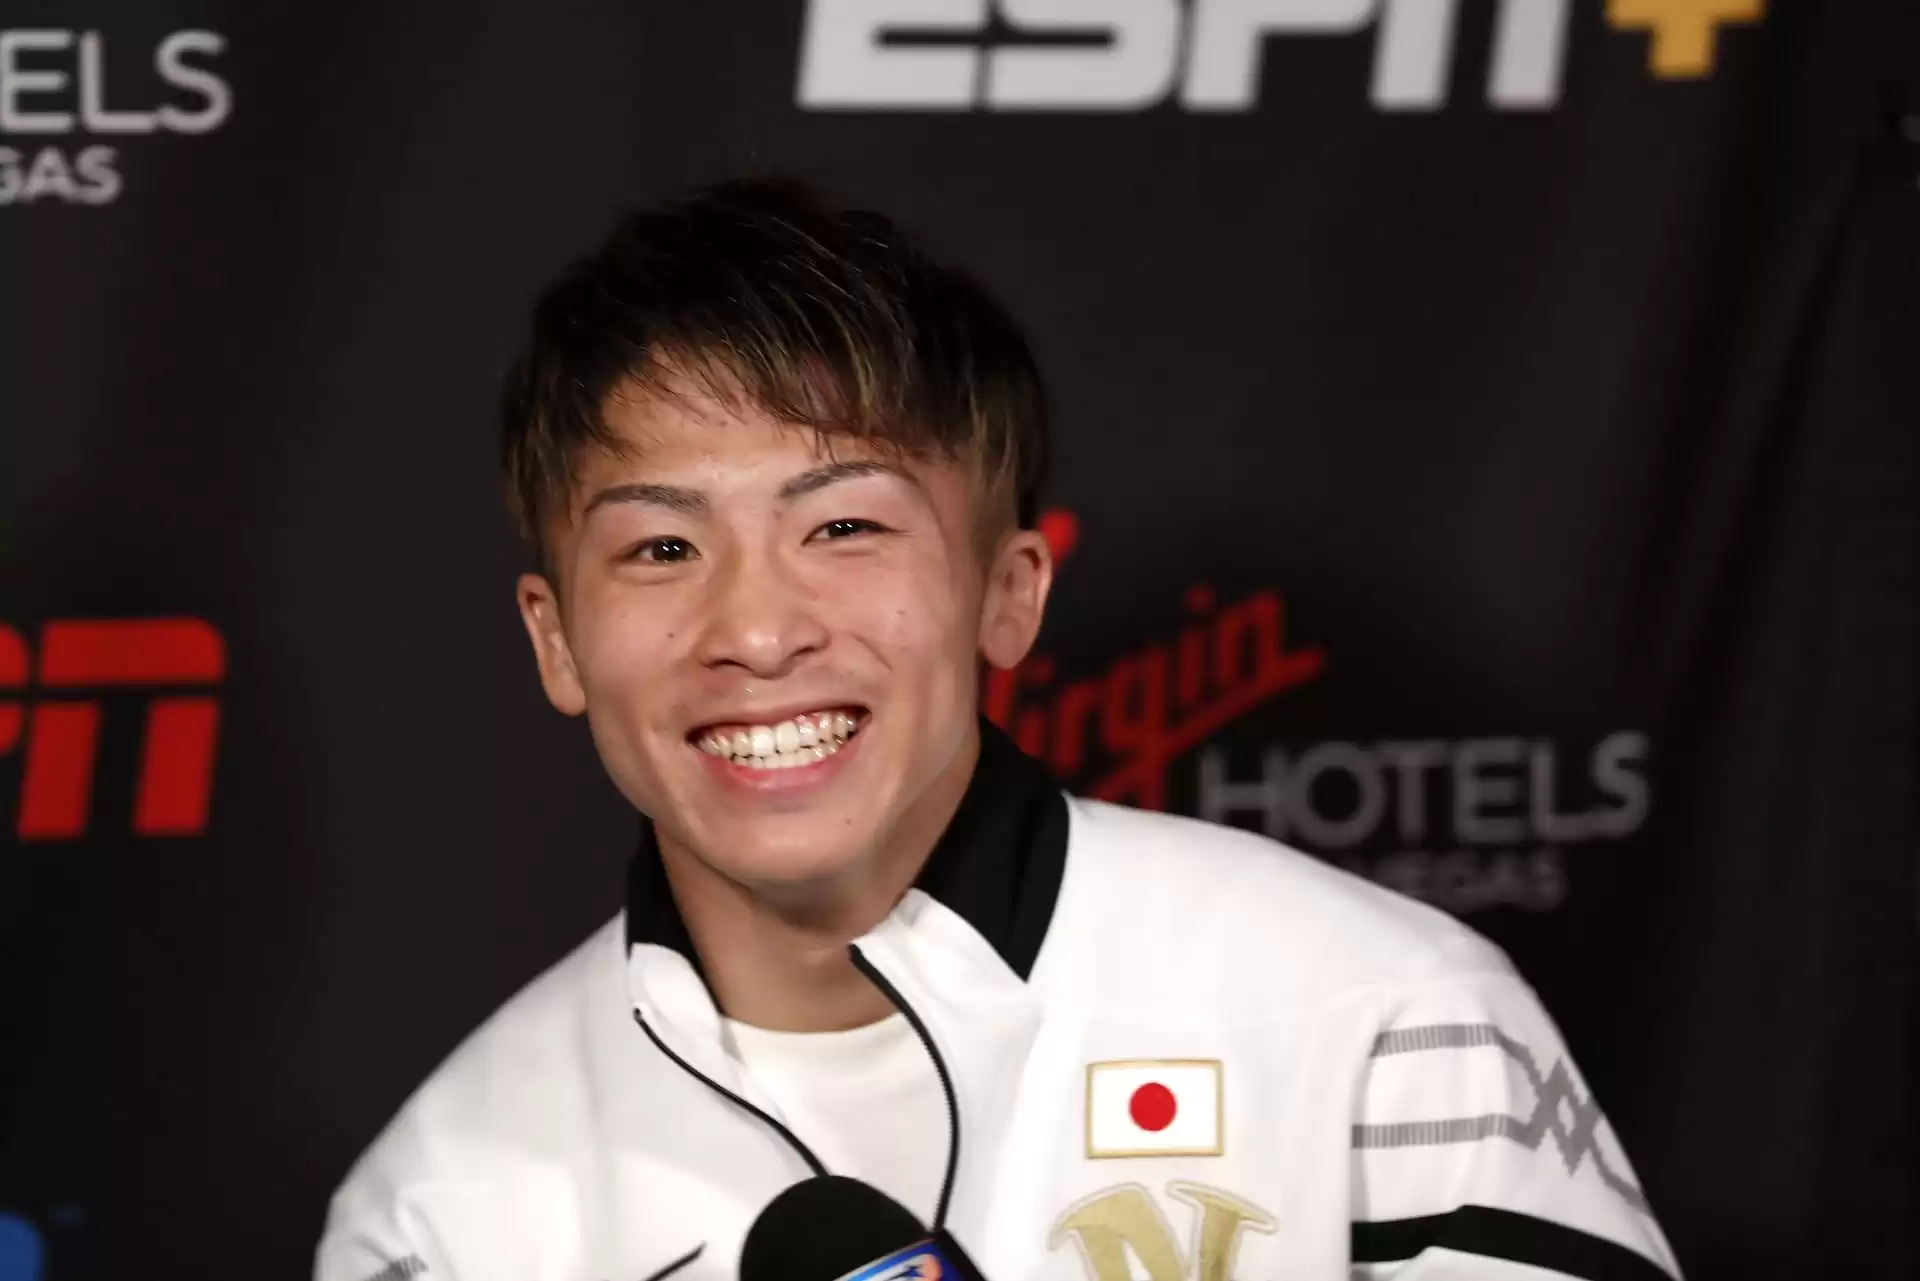 The Next Opponent for Naoya Inoue: What's Next for 'The Monster' After Conquering Stephen Fulton